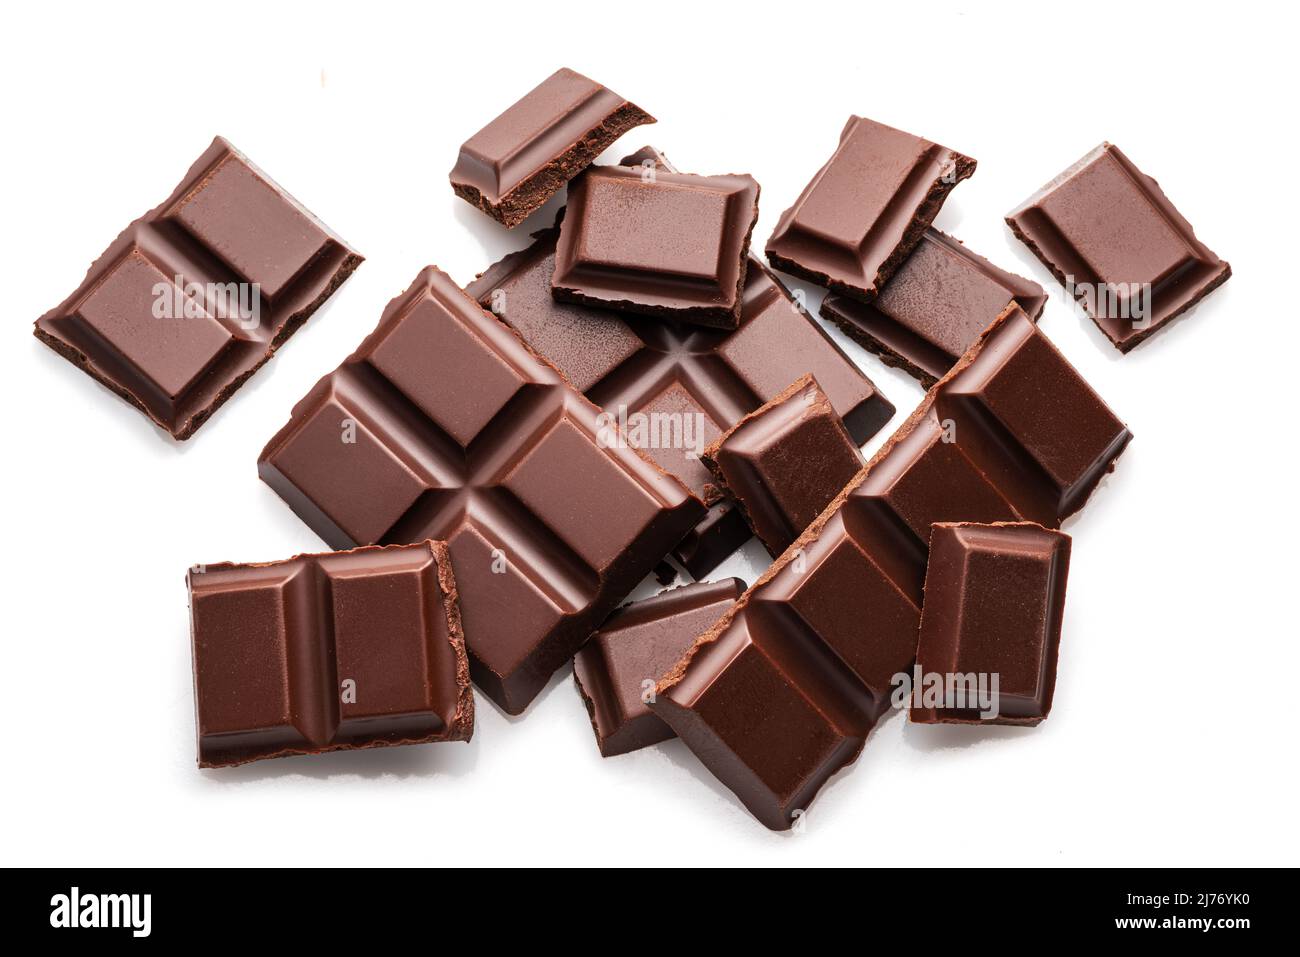 Pieces of dark chocolate bar isolated on white background. Sweet food is made of cocoa and sugar. Stock Photo